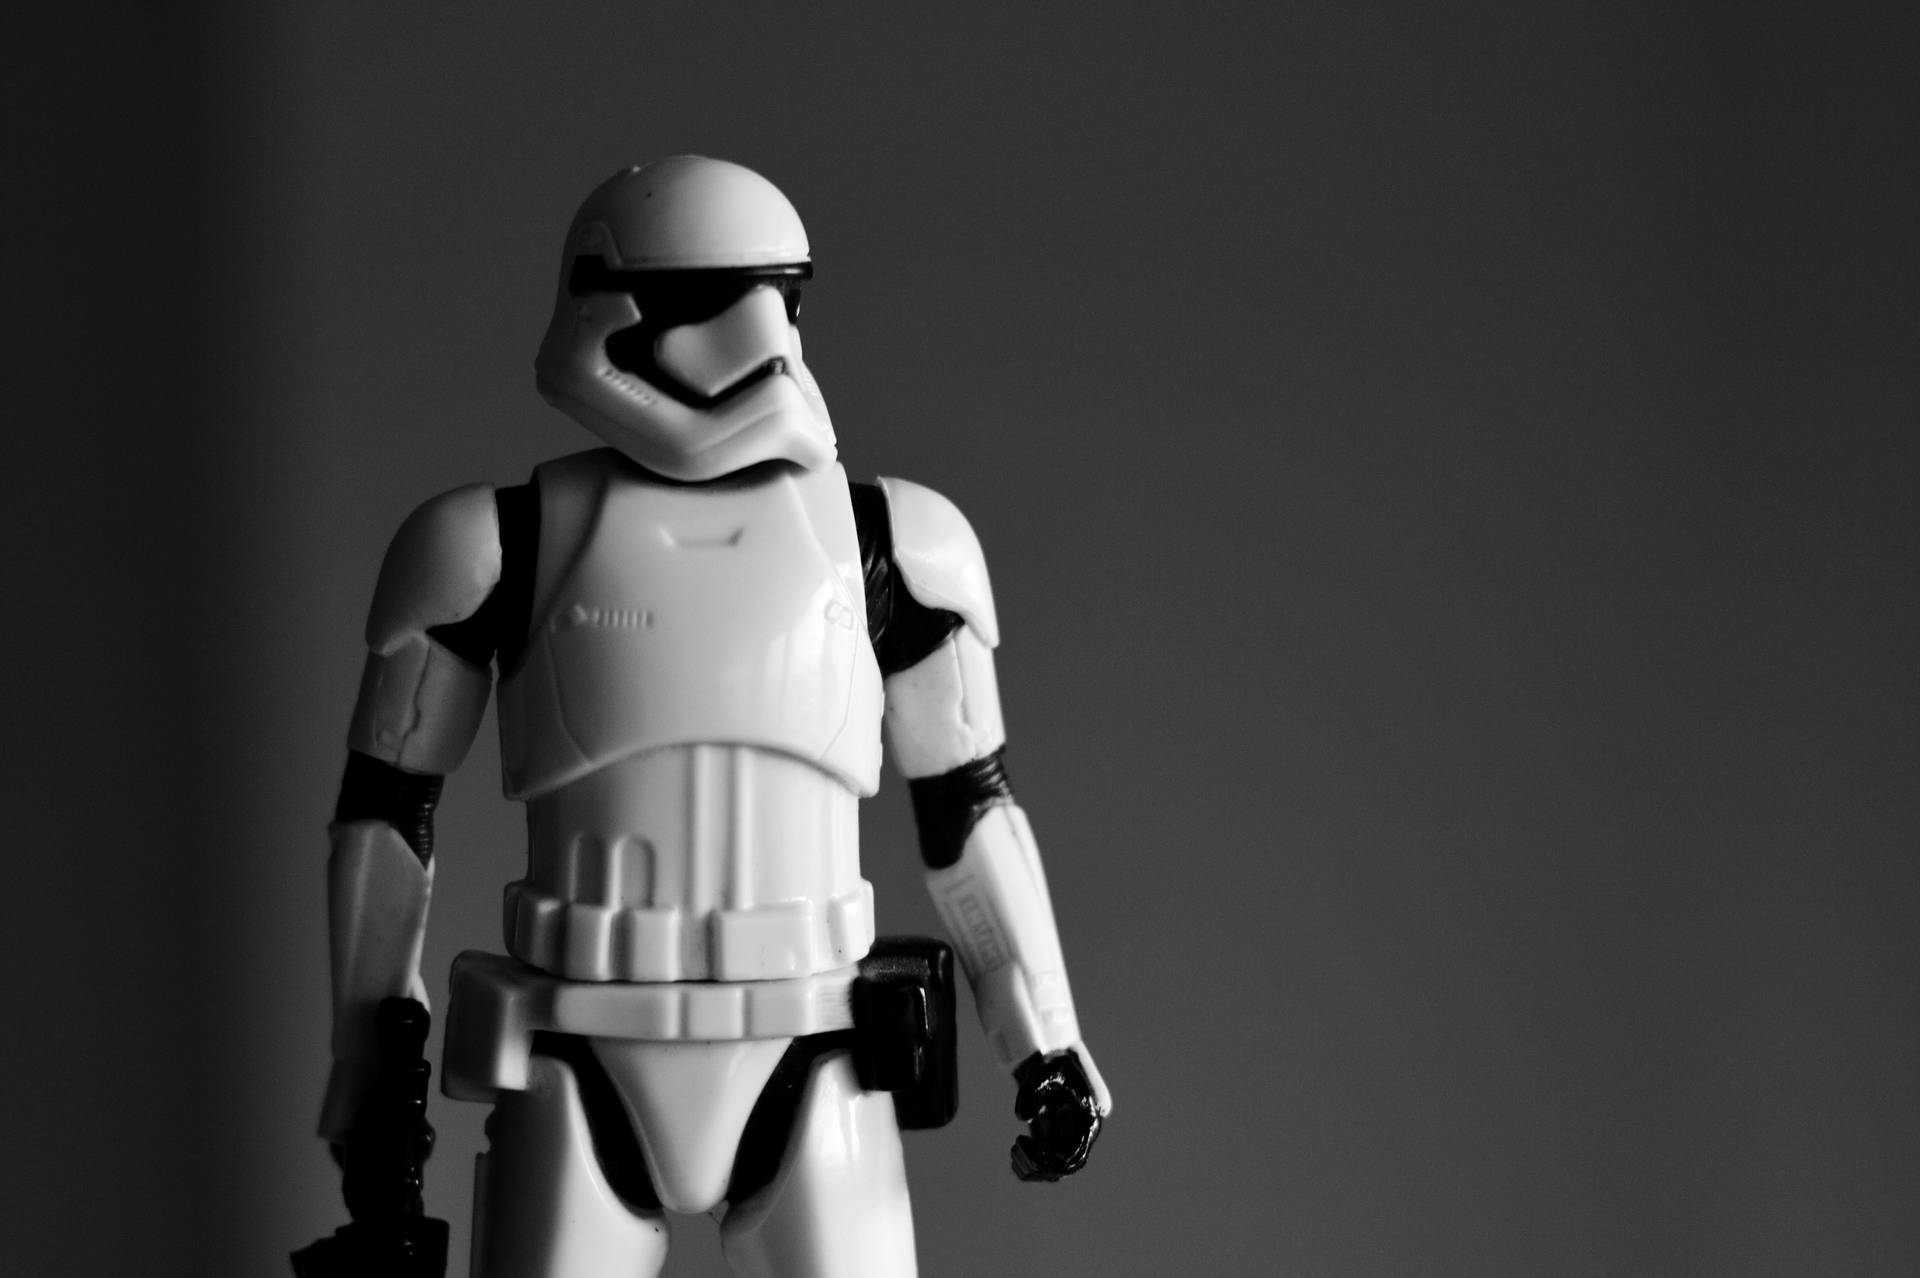 Stormtrooper 3887X2588 Wallpaper and Background Image